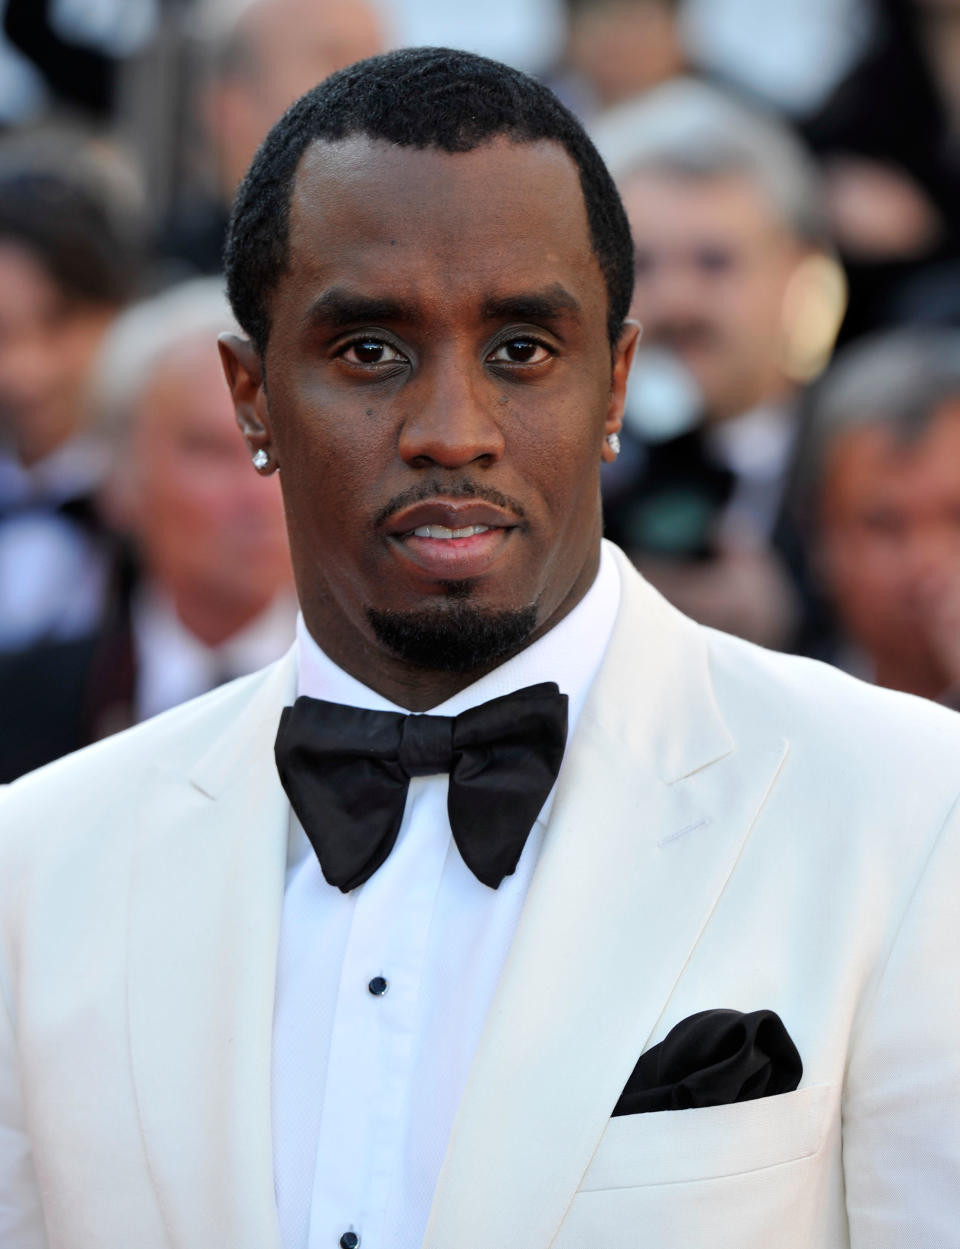 CANNES, FRANCE - MAY 22:  Sean Combs attends the 'Killing Them Softly' Premiere during 65th Annual Cannes Film Festival at Palais des Festivals on May 22, 2012 in Cannes, France.  (Photo by Gareth Cattermole/Getty Images)